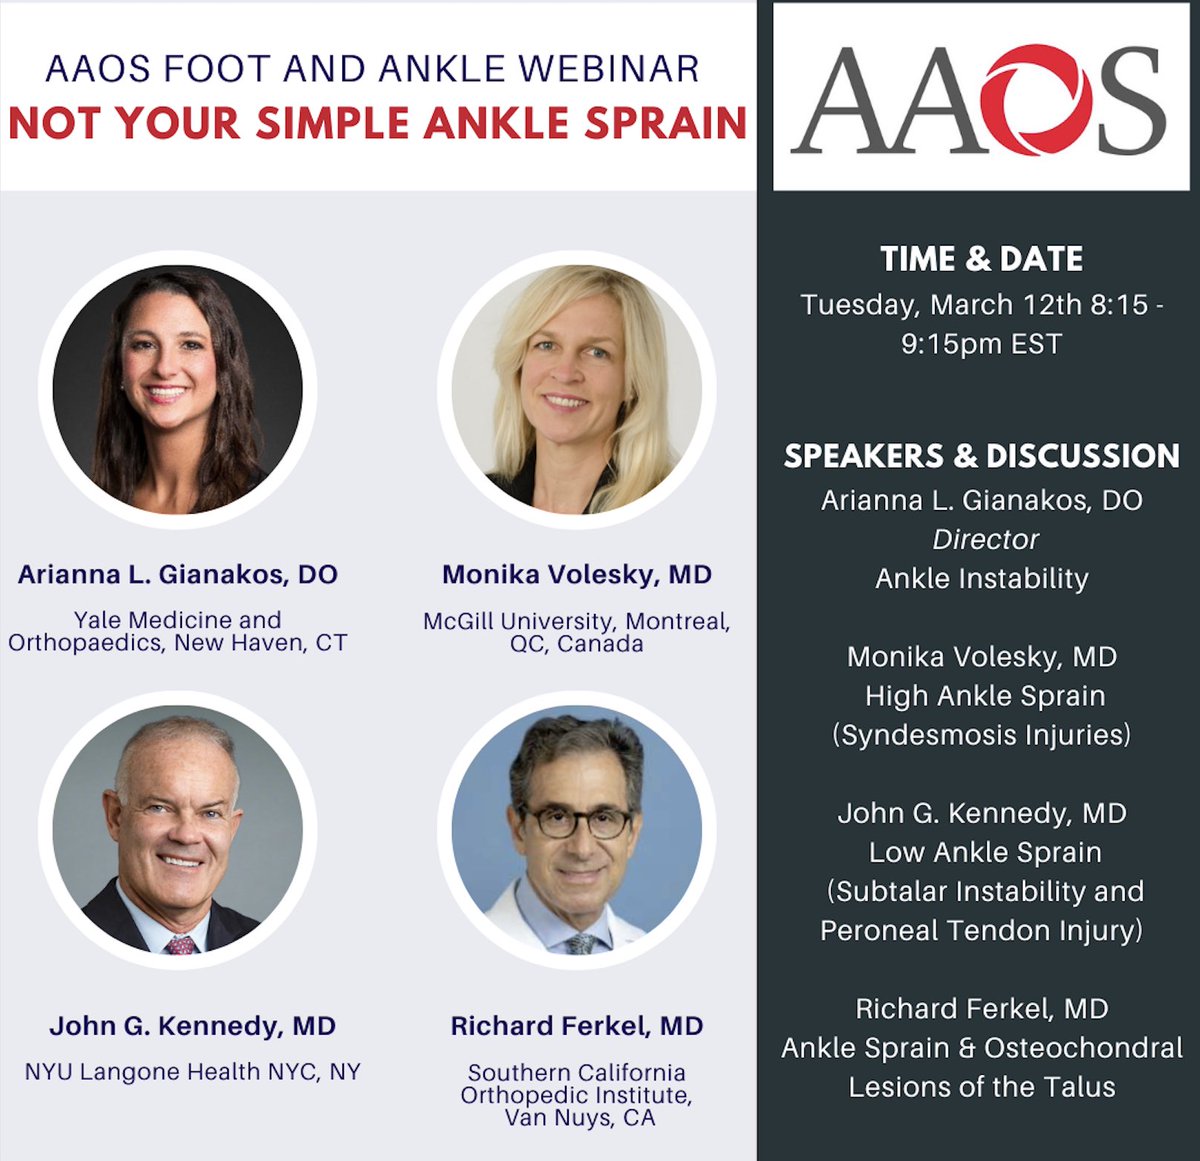 You won’t want to miss this! AAOS WEBINAR: Not your simple ankle sprain! @AAOS1 @OrthoAtYale @drjohnkennedy @AOFAS @AANAORG @YNHH Sign up: www5.aaos.org/calendar/event…